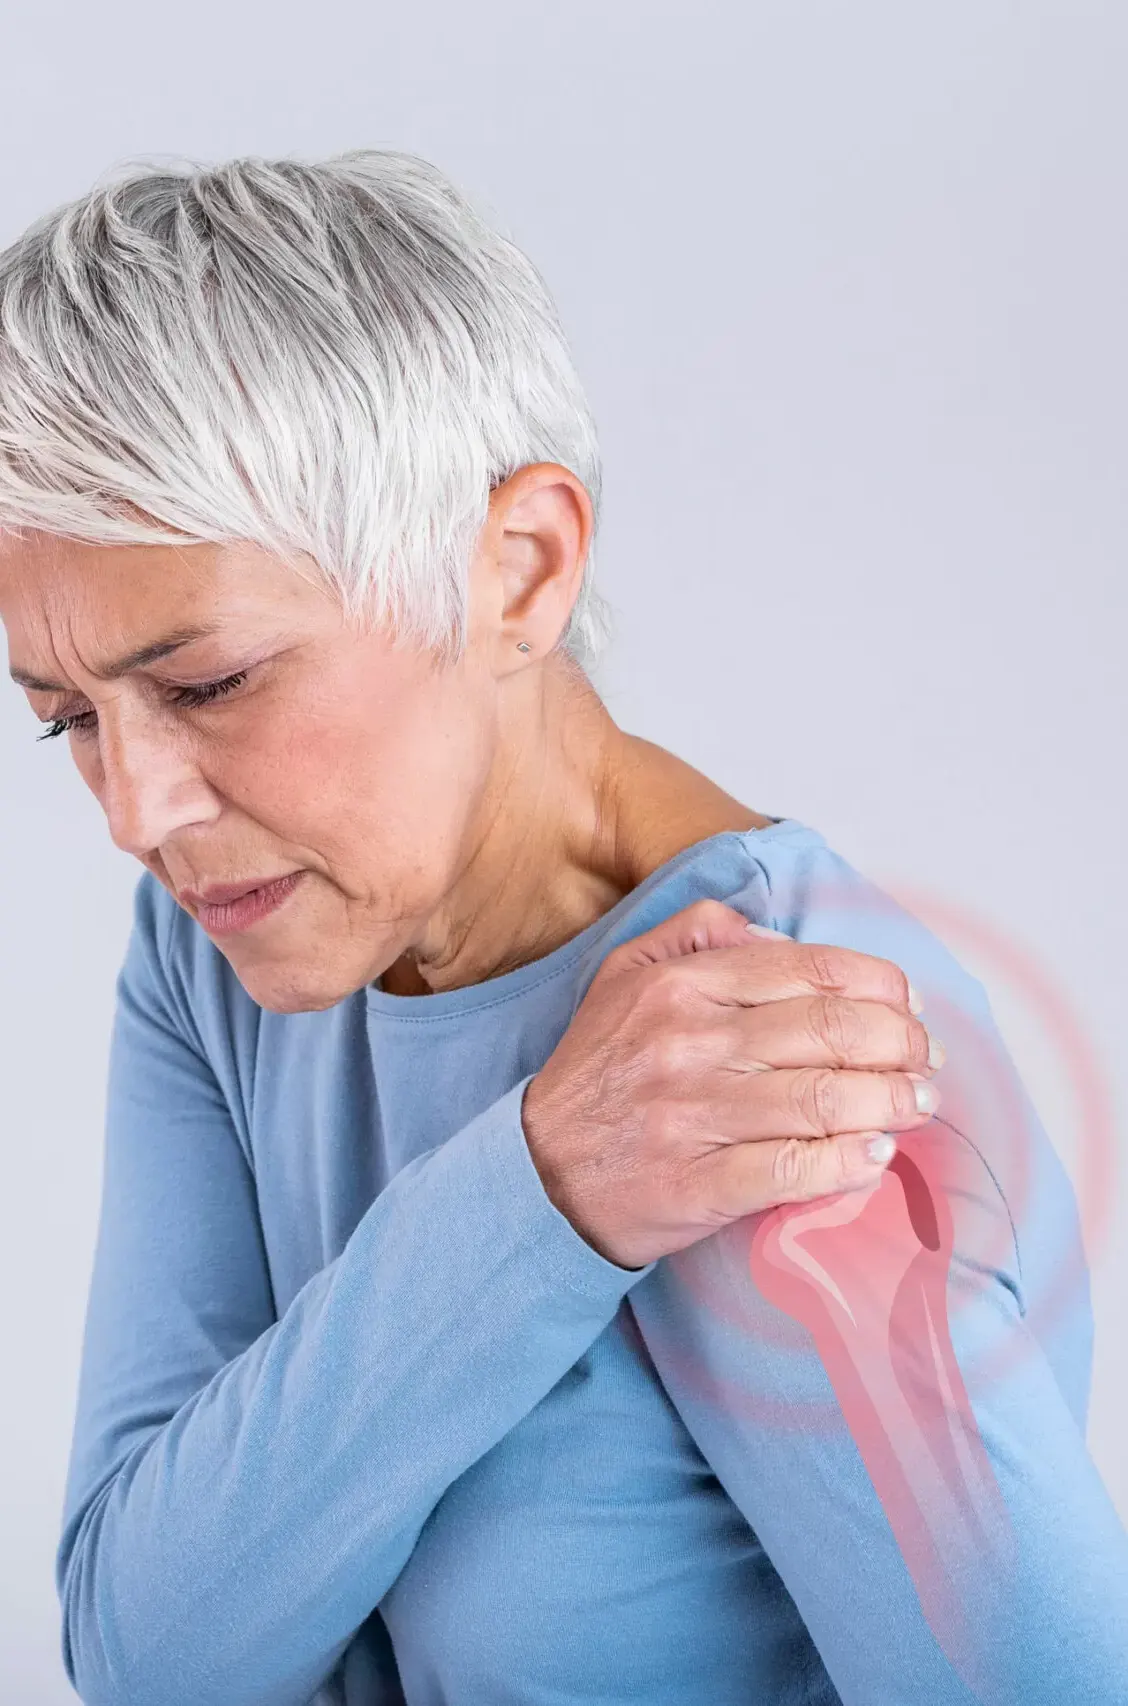 Relieve shoulder pain by the chiropractor